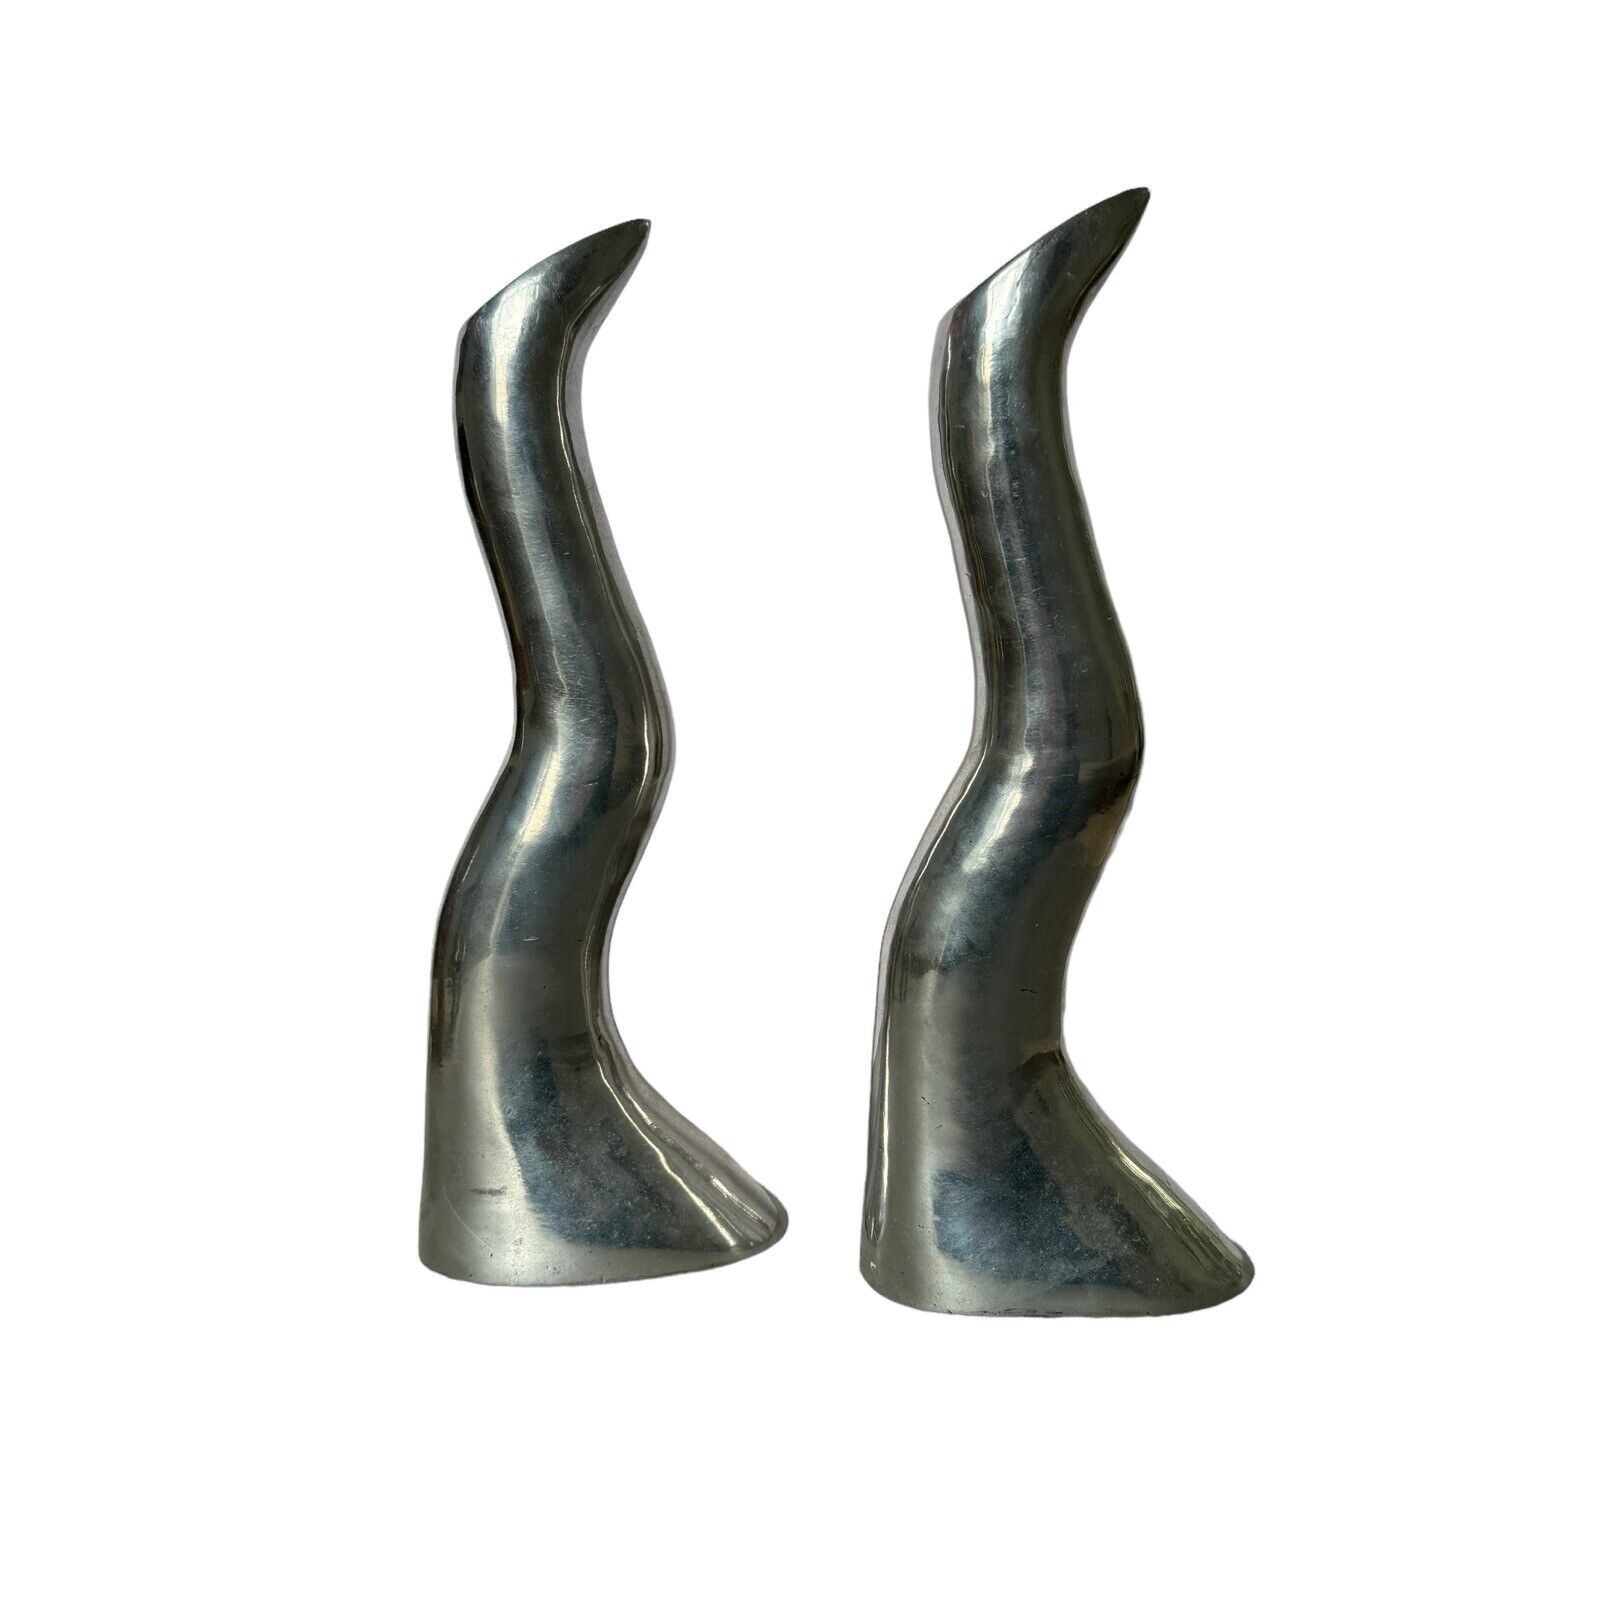 Modernist Aluminum Candle Holders by Anna Everlund 12\